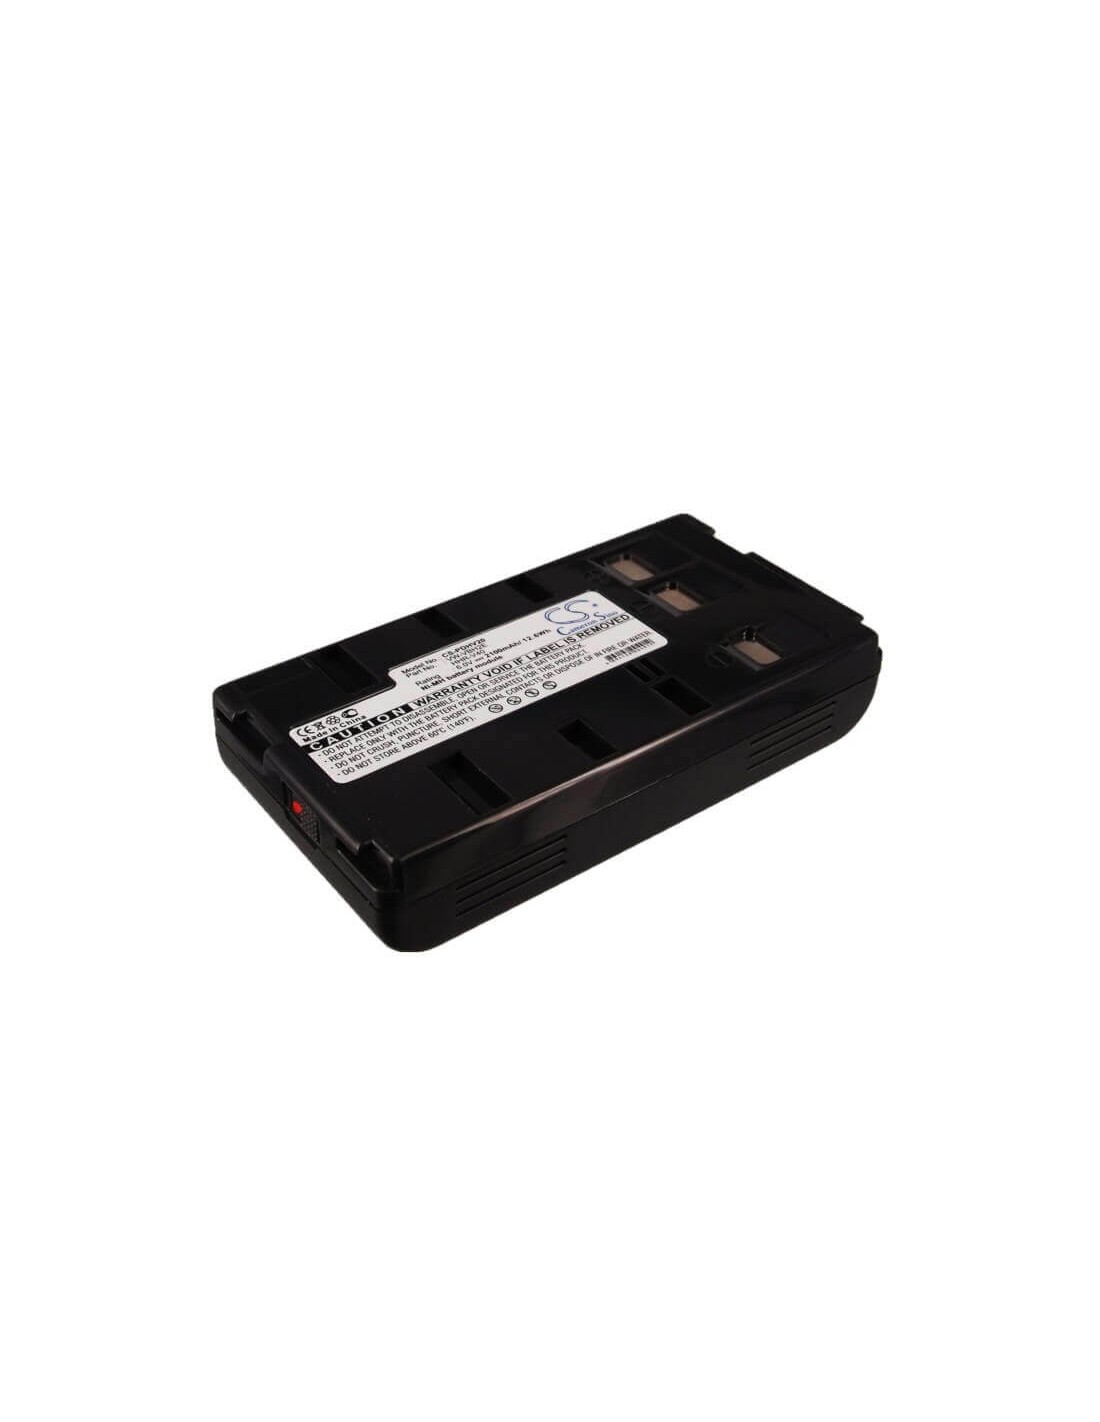 Battery for Grundig Lc-355, Lc-400, Lc-410, Lc-450, 6V, 2100mAh - 12.60Wh